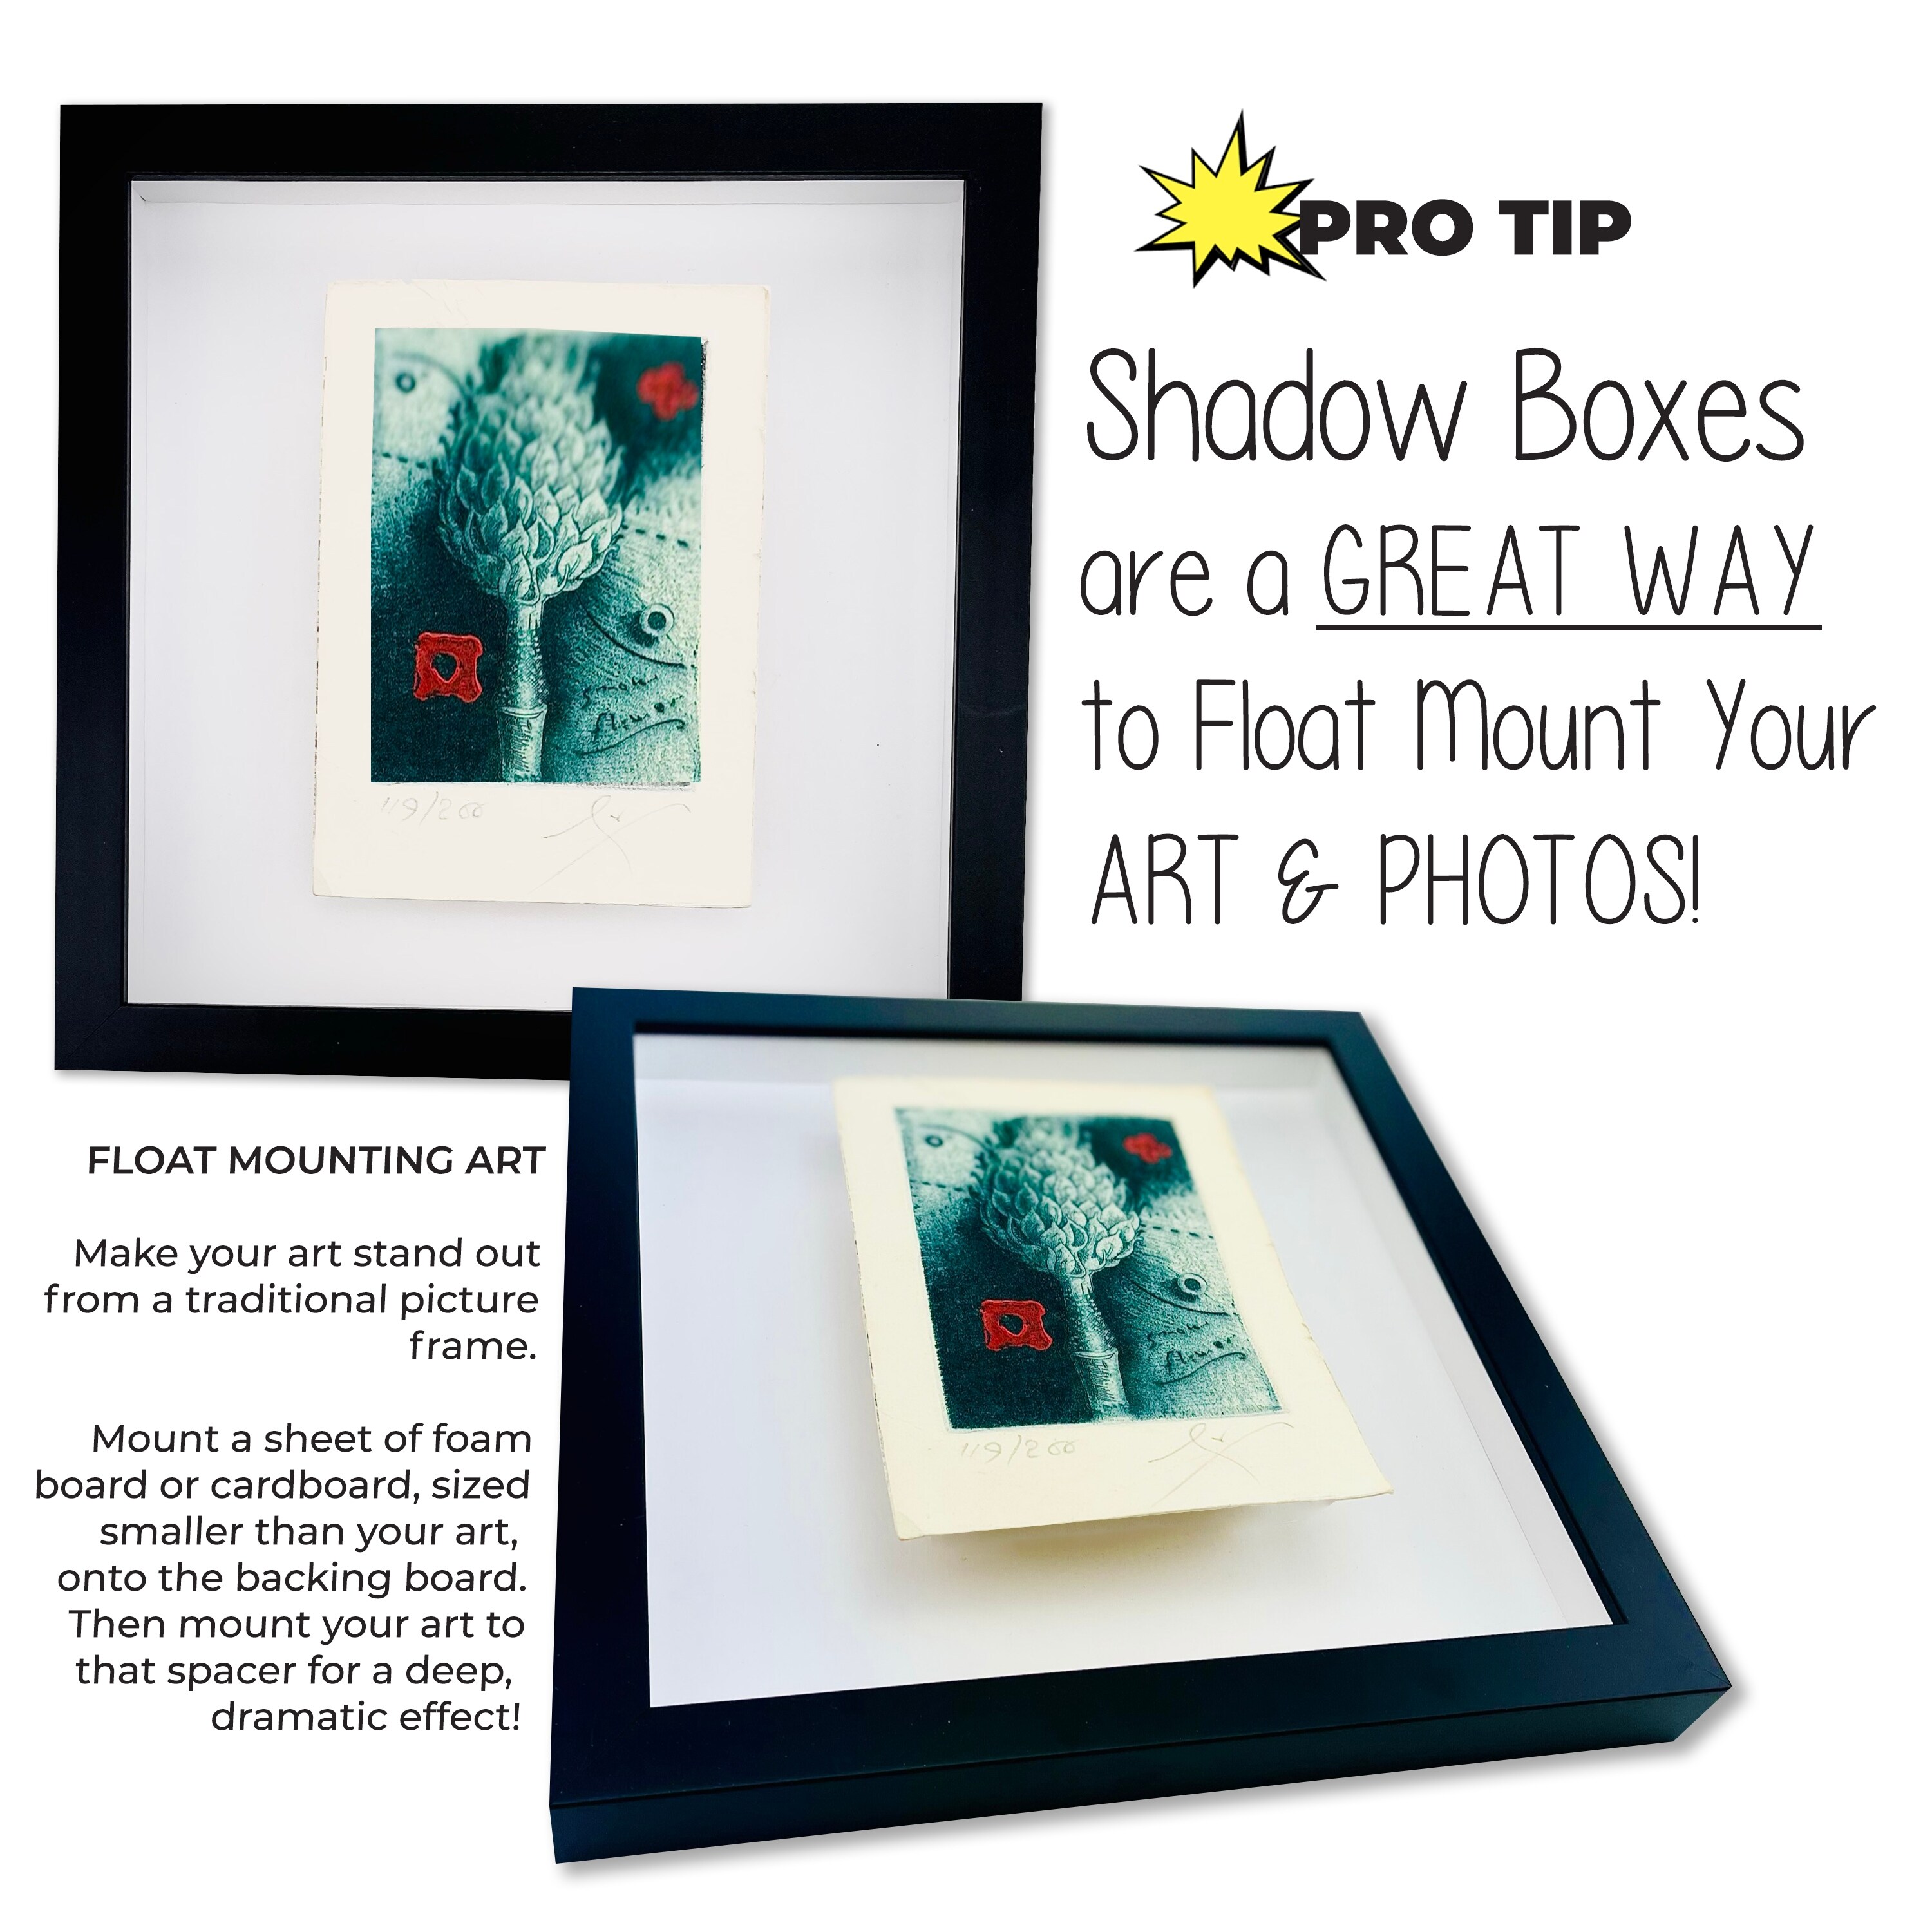 Charcoal 8x8 Wood Shadow Box with Black Acid-Free Backing - With 5/8  Usable Depth - With UV Acrylic & Hanging Hardware - On Sale - Bed Bath &  Beyond - 38022781